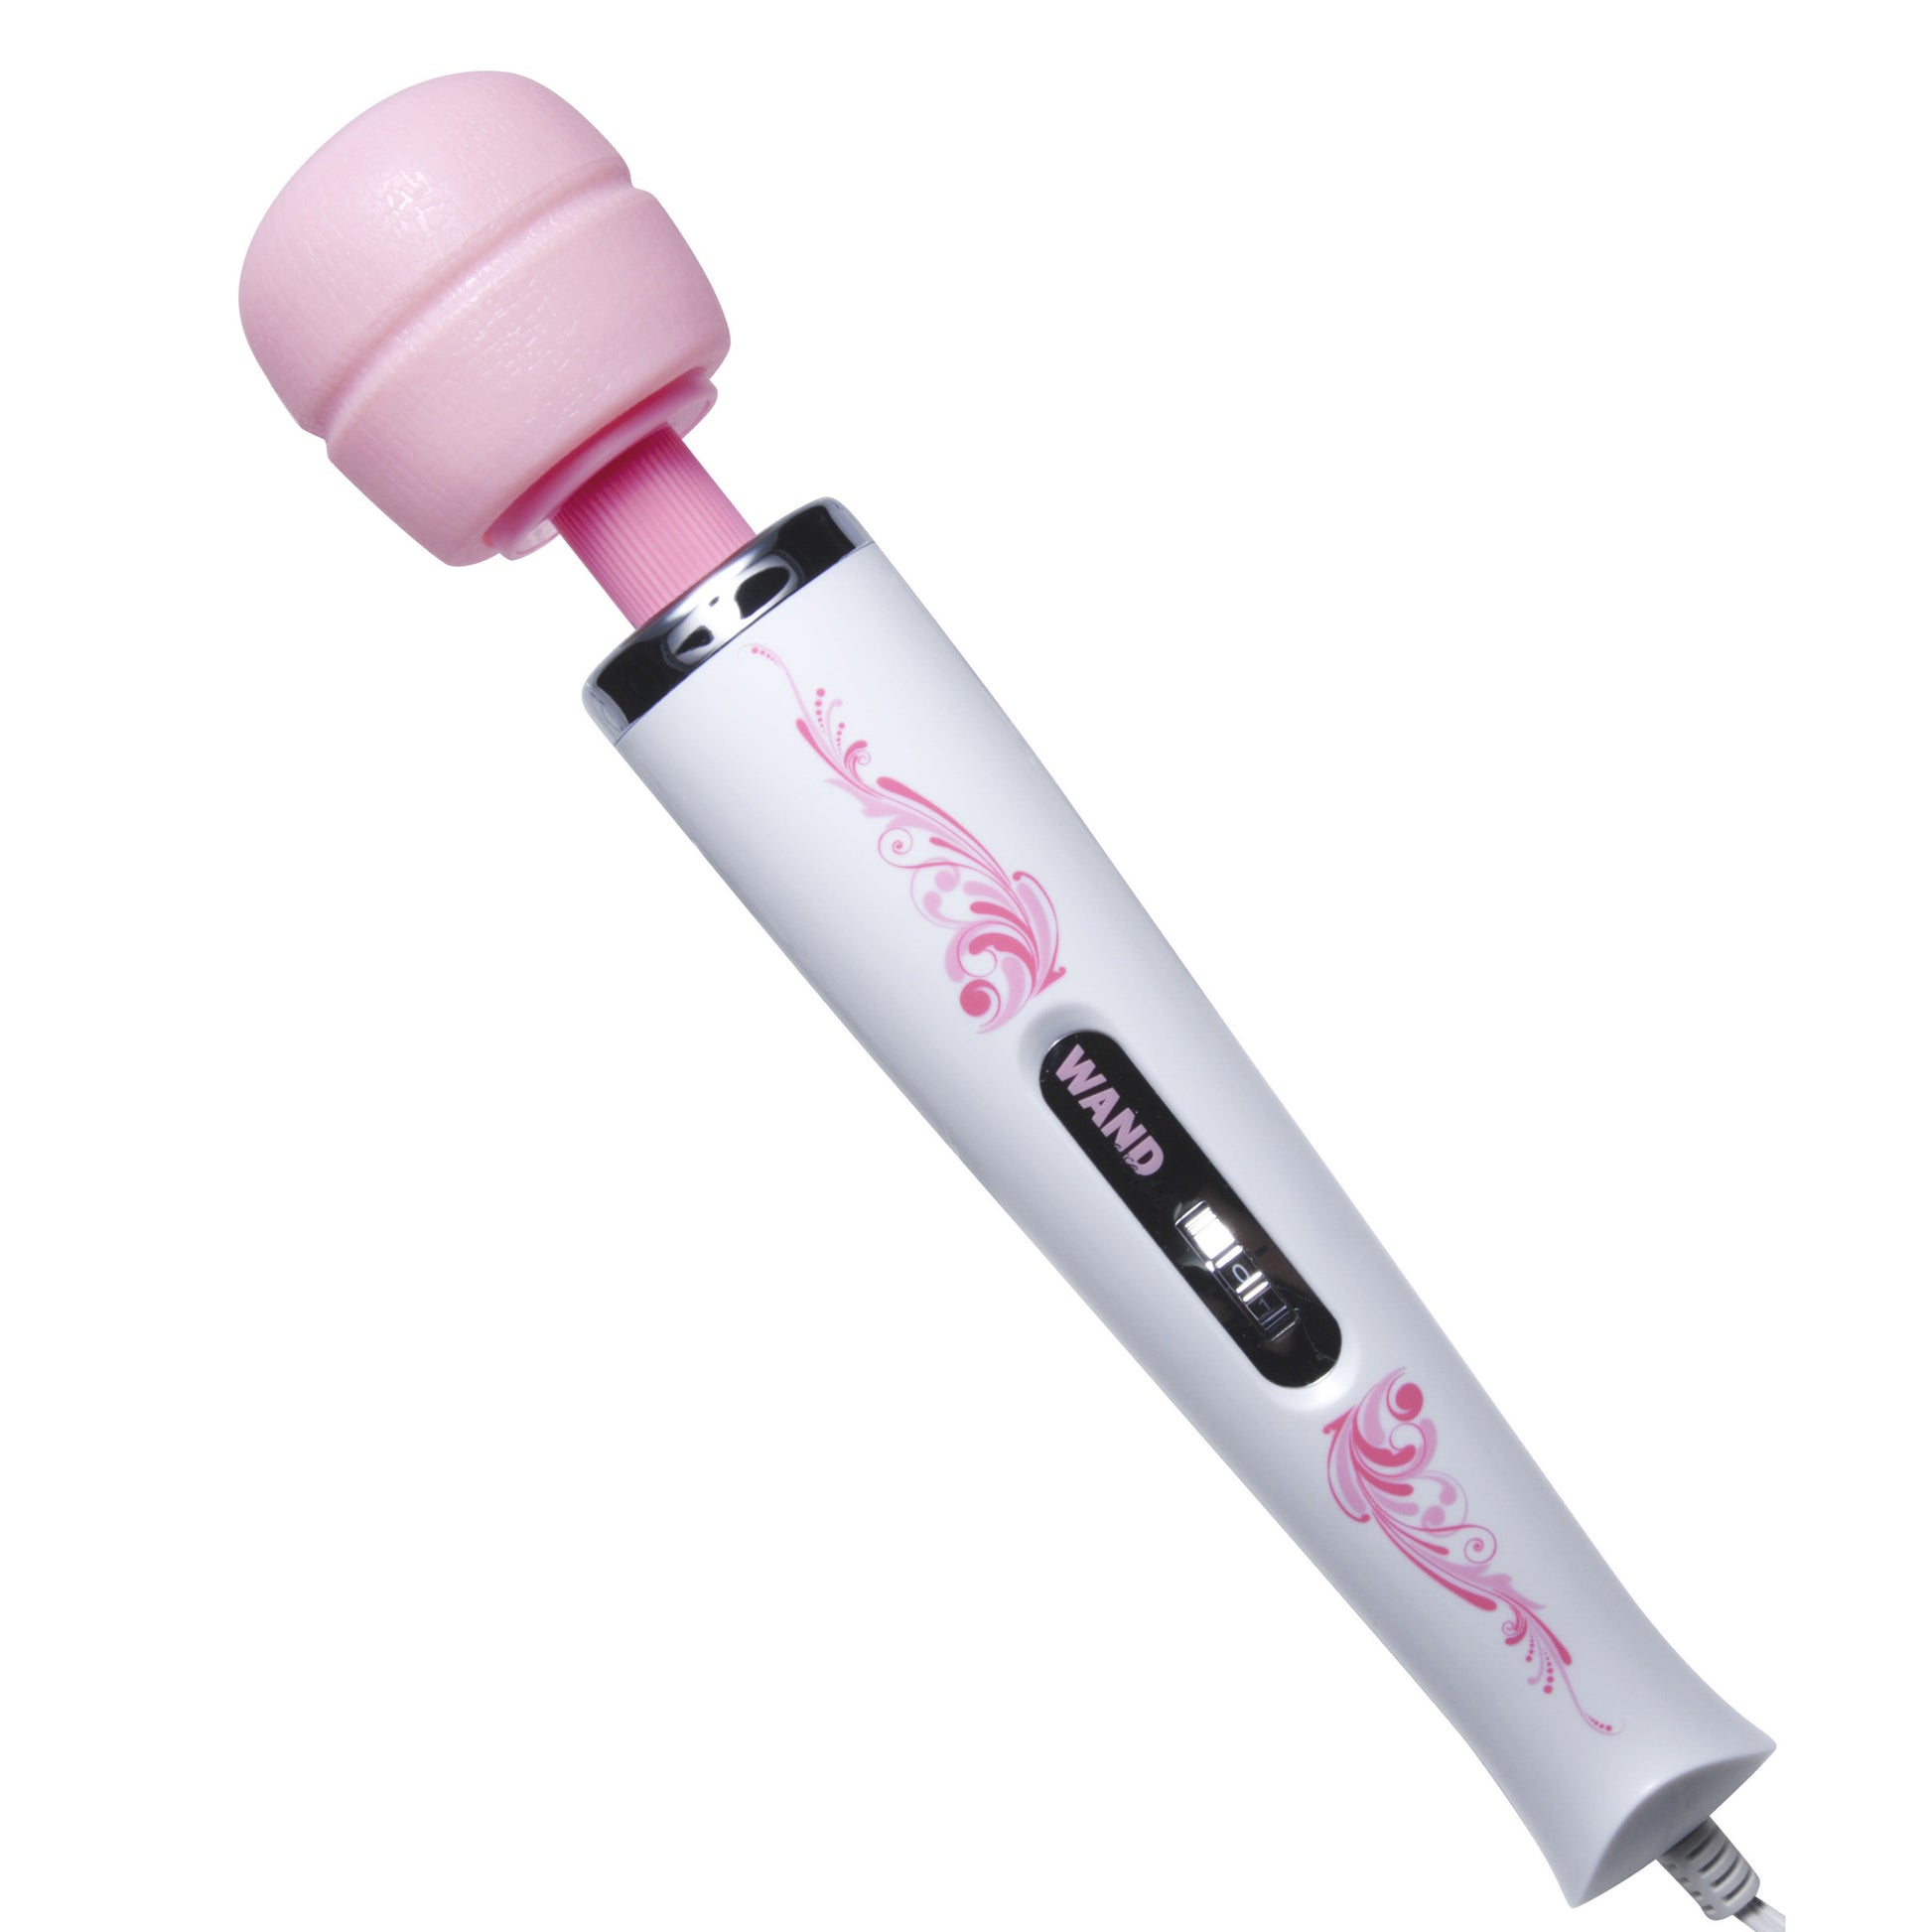 7 Speed Wand Massager with Attachment Kit - UABDSM